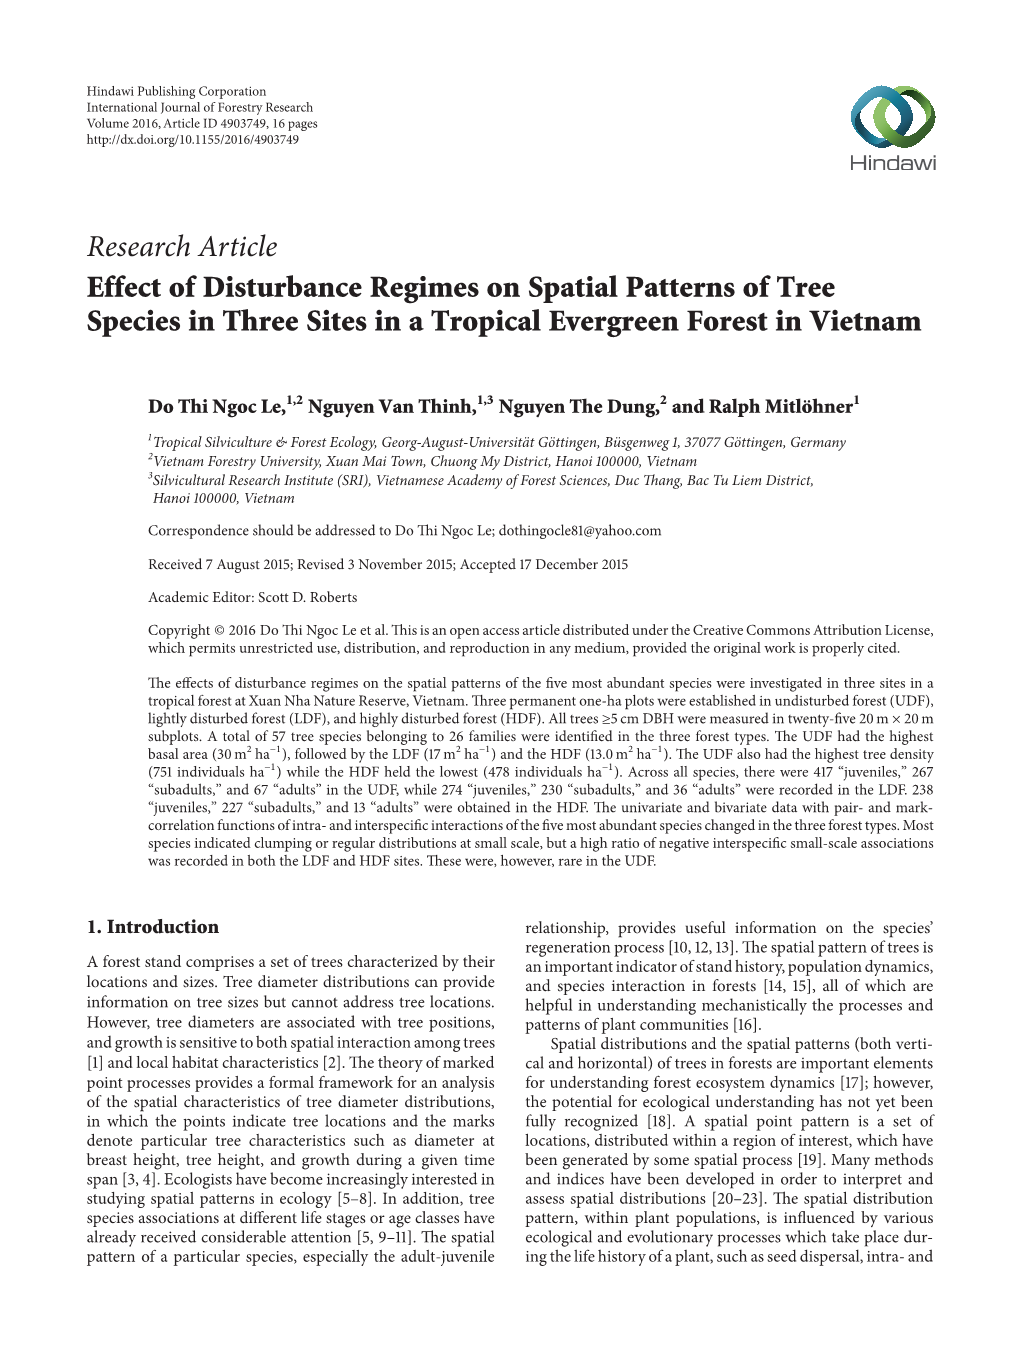 Effect of Disturbance Regimes on Spatial Patterns of Tree Species in Three Sites in a Tropical Evergreen Forest in Vietnam